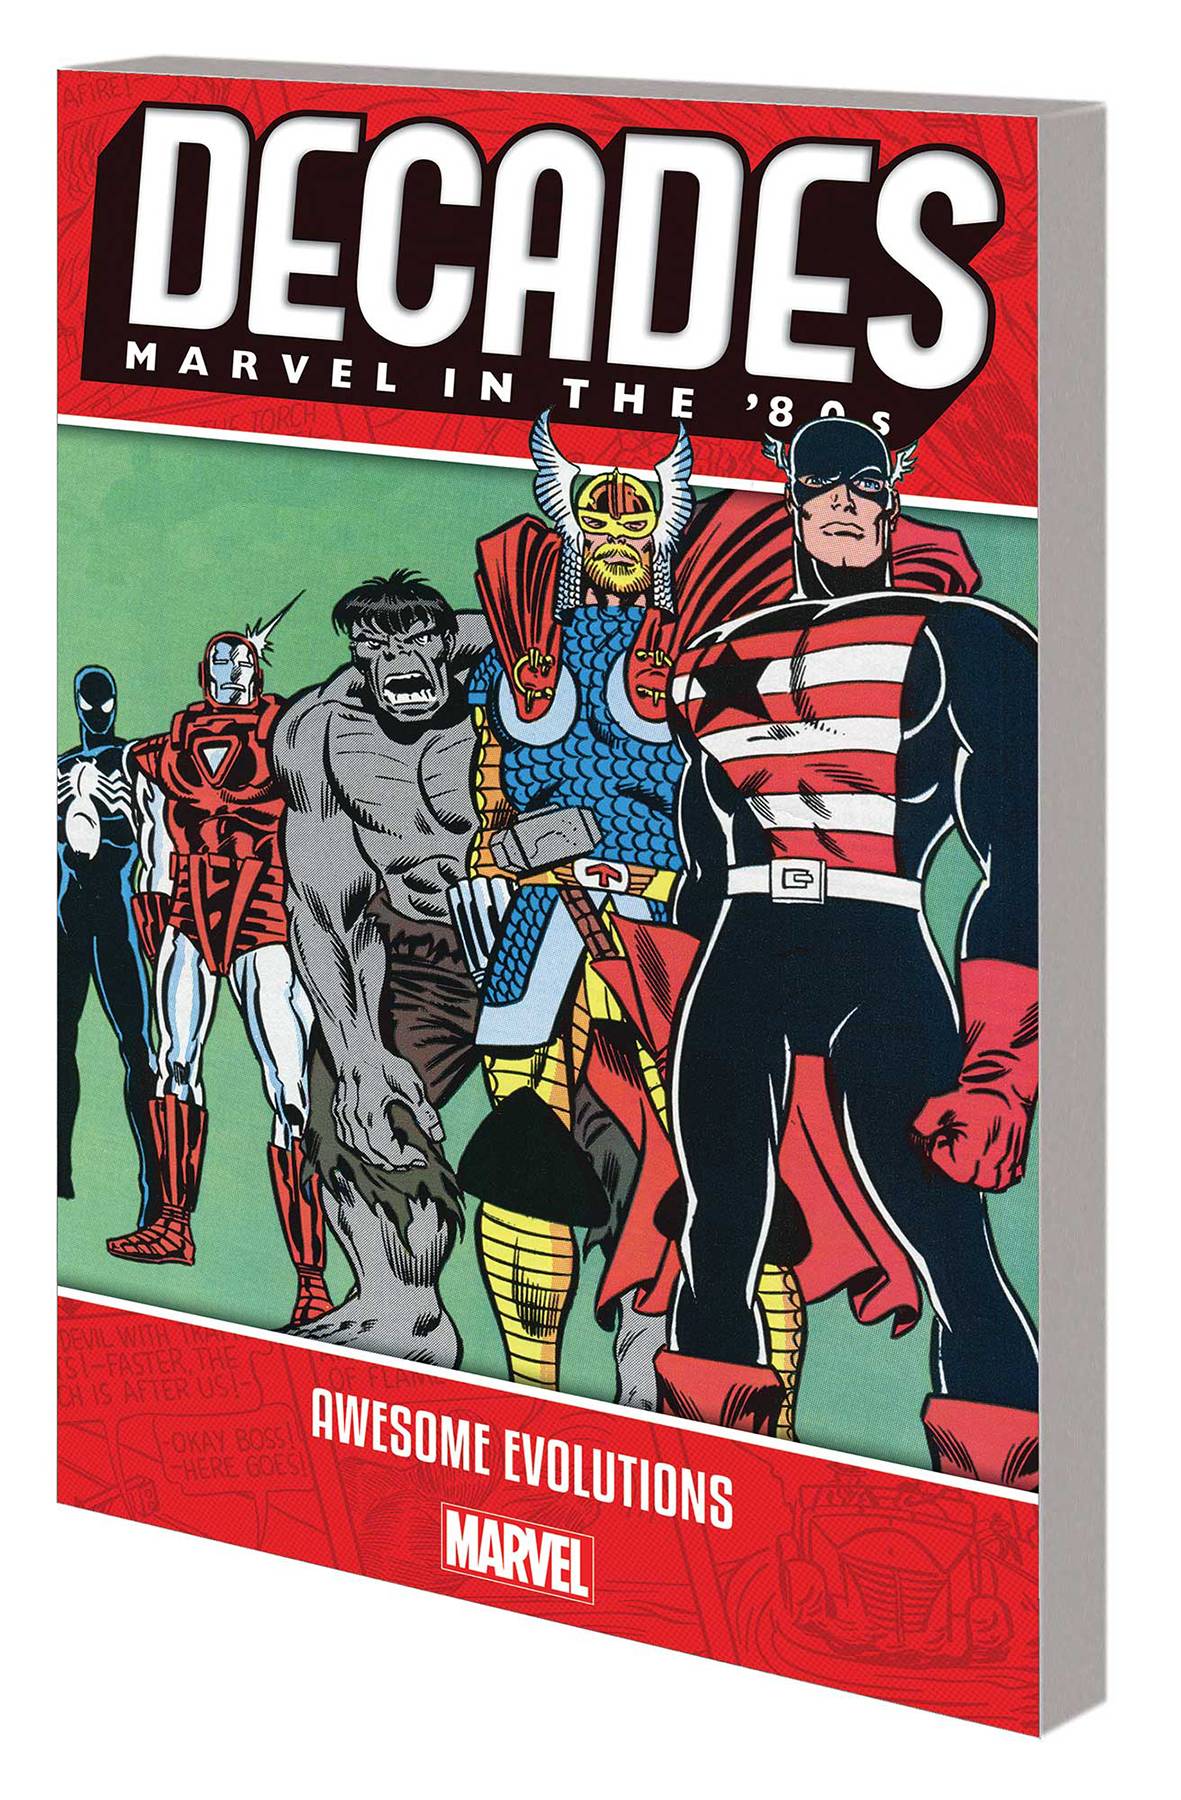 Decades Marvel 80's Graphic Novel Awesome Evolutions